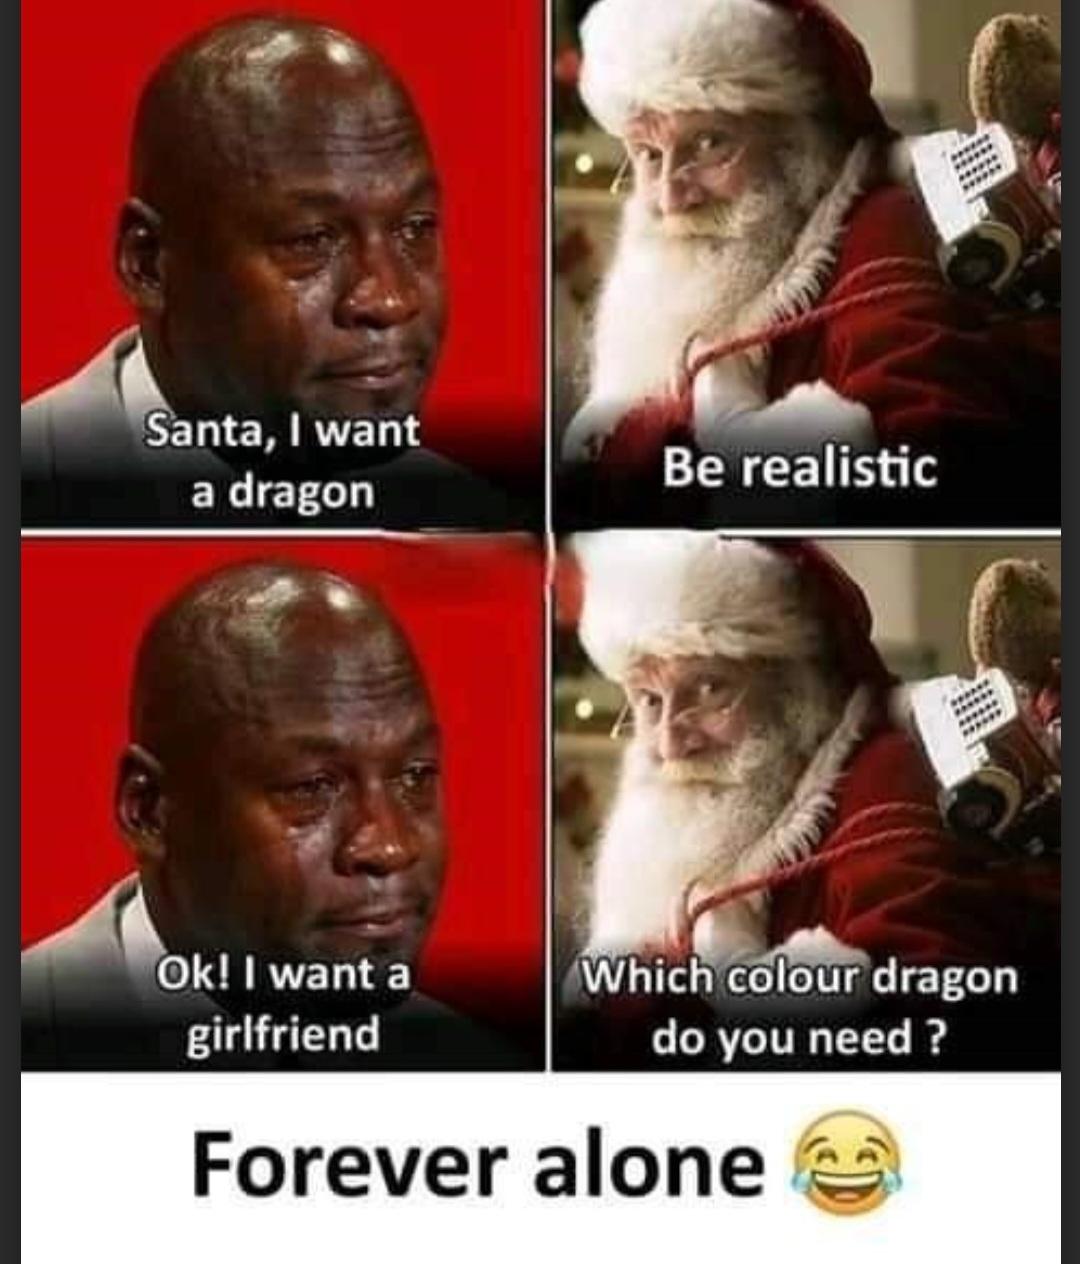 Santa, I want
a dragon
Ok! I want a
girlfriend
Be realistic
www
******
******
Which colour dragon
do you need?
Forever alone